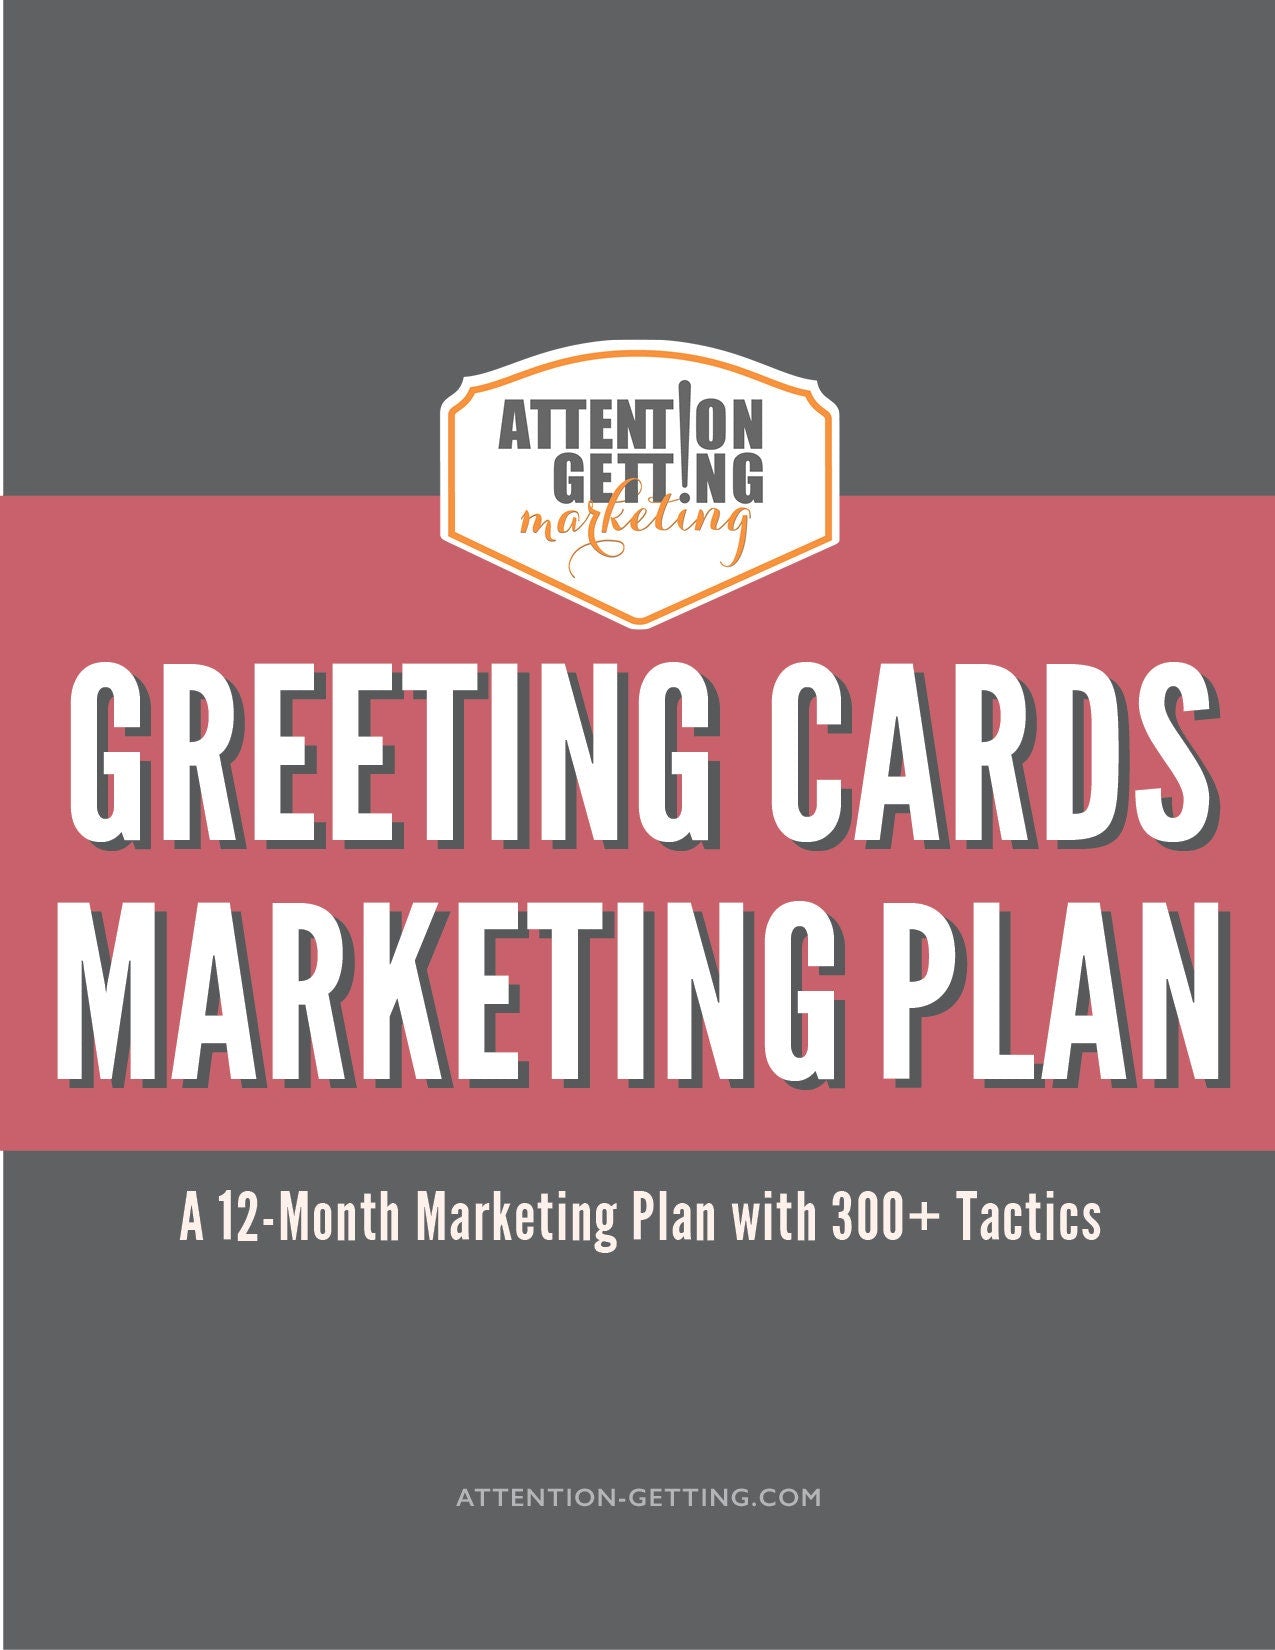 12 month marketing strategy plan for small businesses or etsy shops selling greeting cards